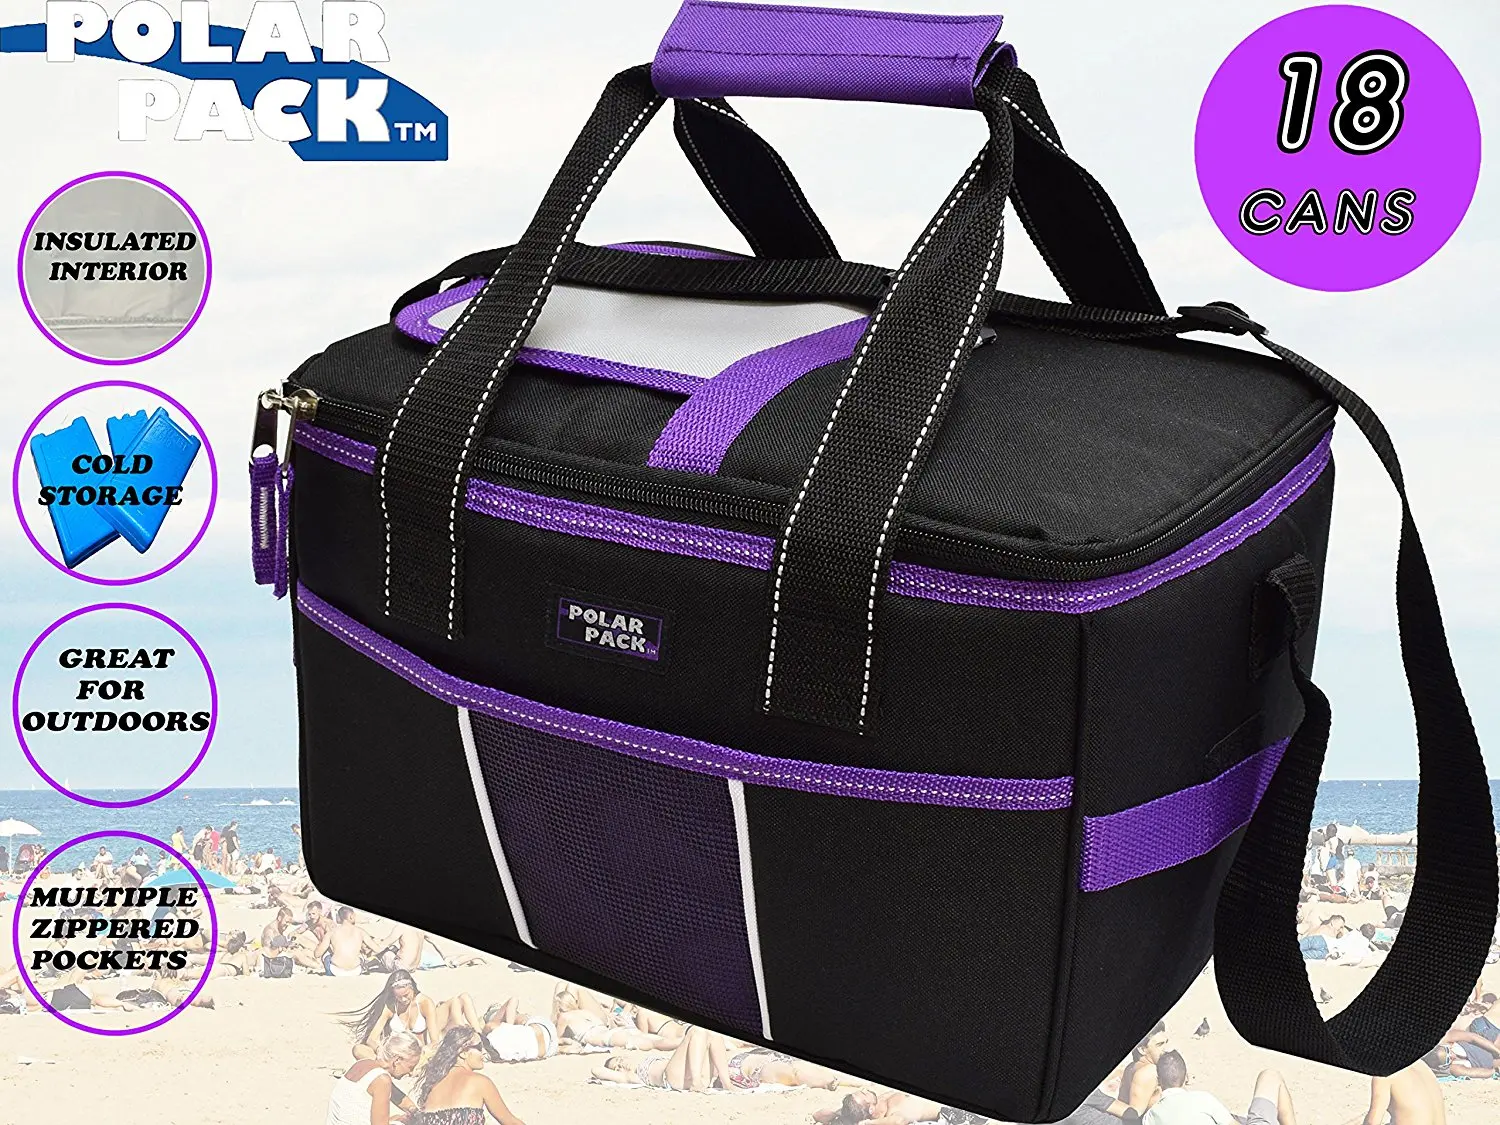 POLAR PACK Insulated Lunch Bag Insulated Tote Bag Cooler Bag Side Zipper Pocket Handle Carry Insulated Picnic Bag Indoor Outdoor Carry Bag Portable Travel Bag for Beach /& Work PURPLE//RASPBERRY//LIME